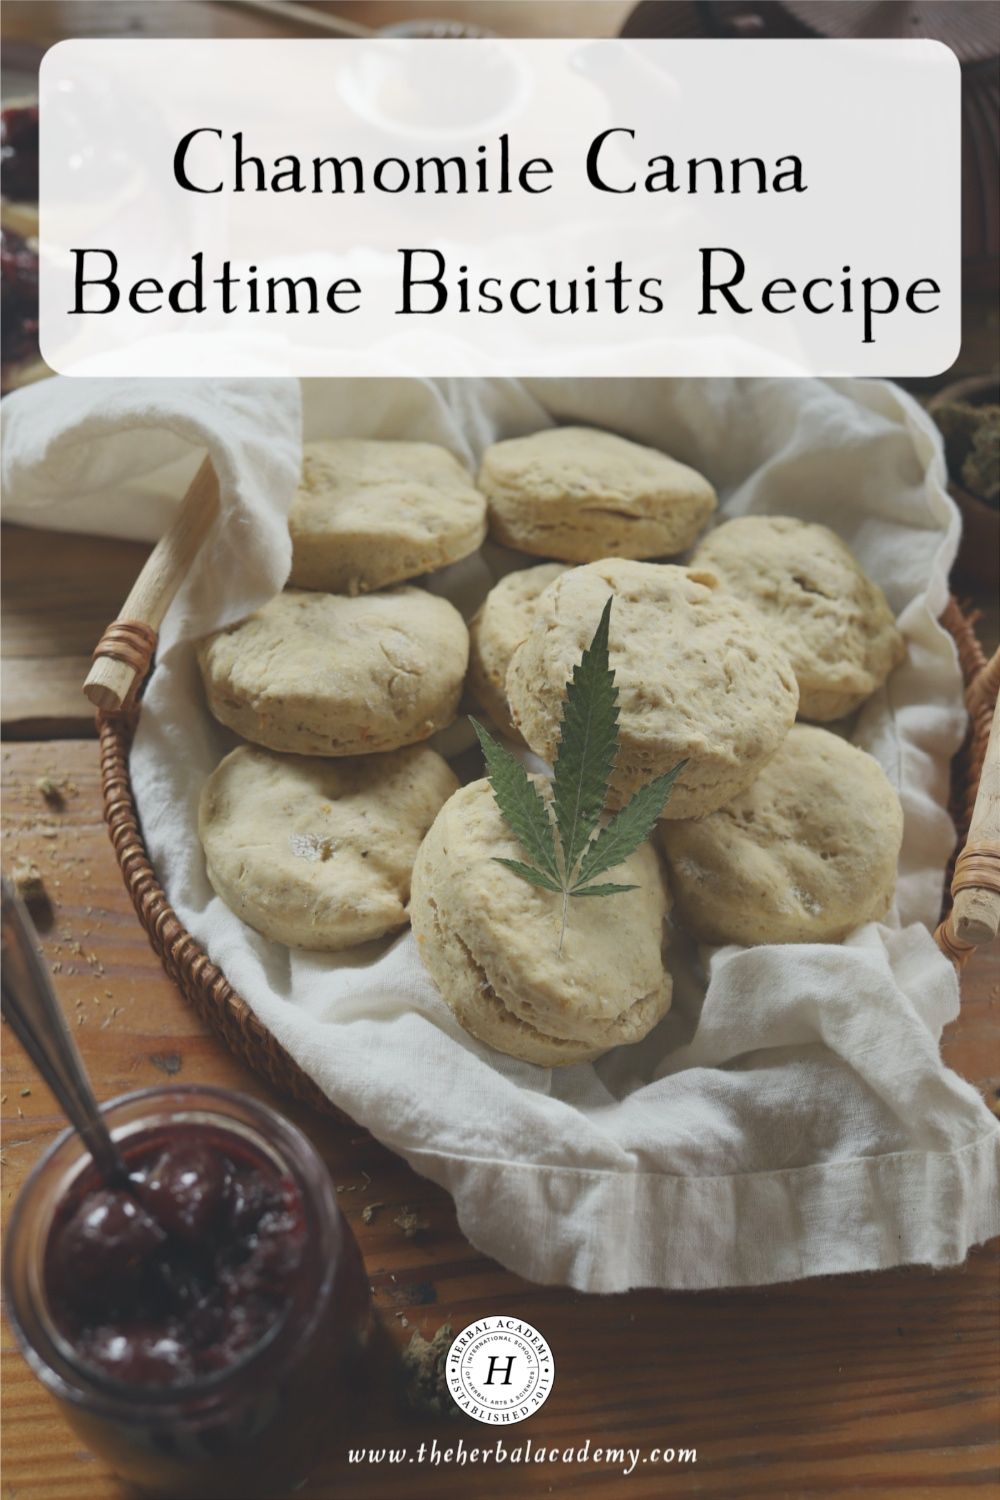 Chamomile Canna Bedtime Biscuits Recipe | Herbal Academy | These savory biscuits with chamomile and cannabis work together to prepare your mind and body for a restful night’s sleep.